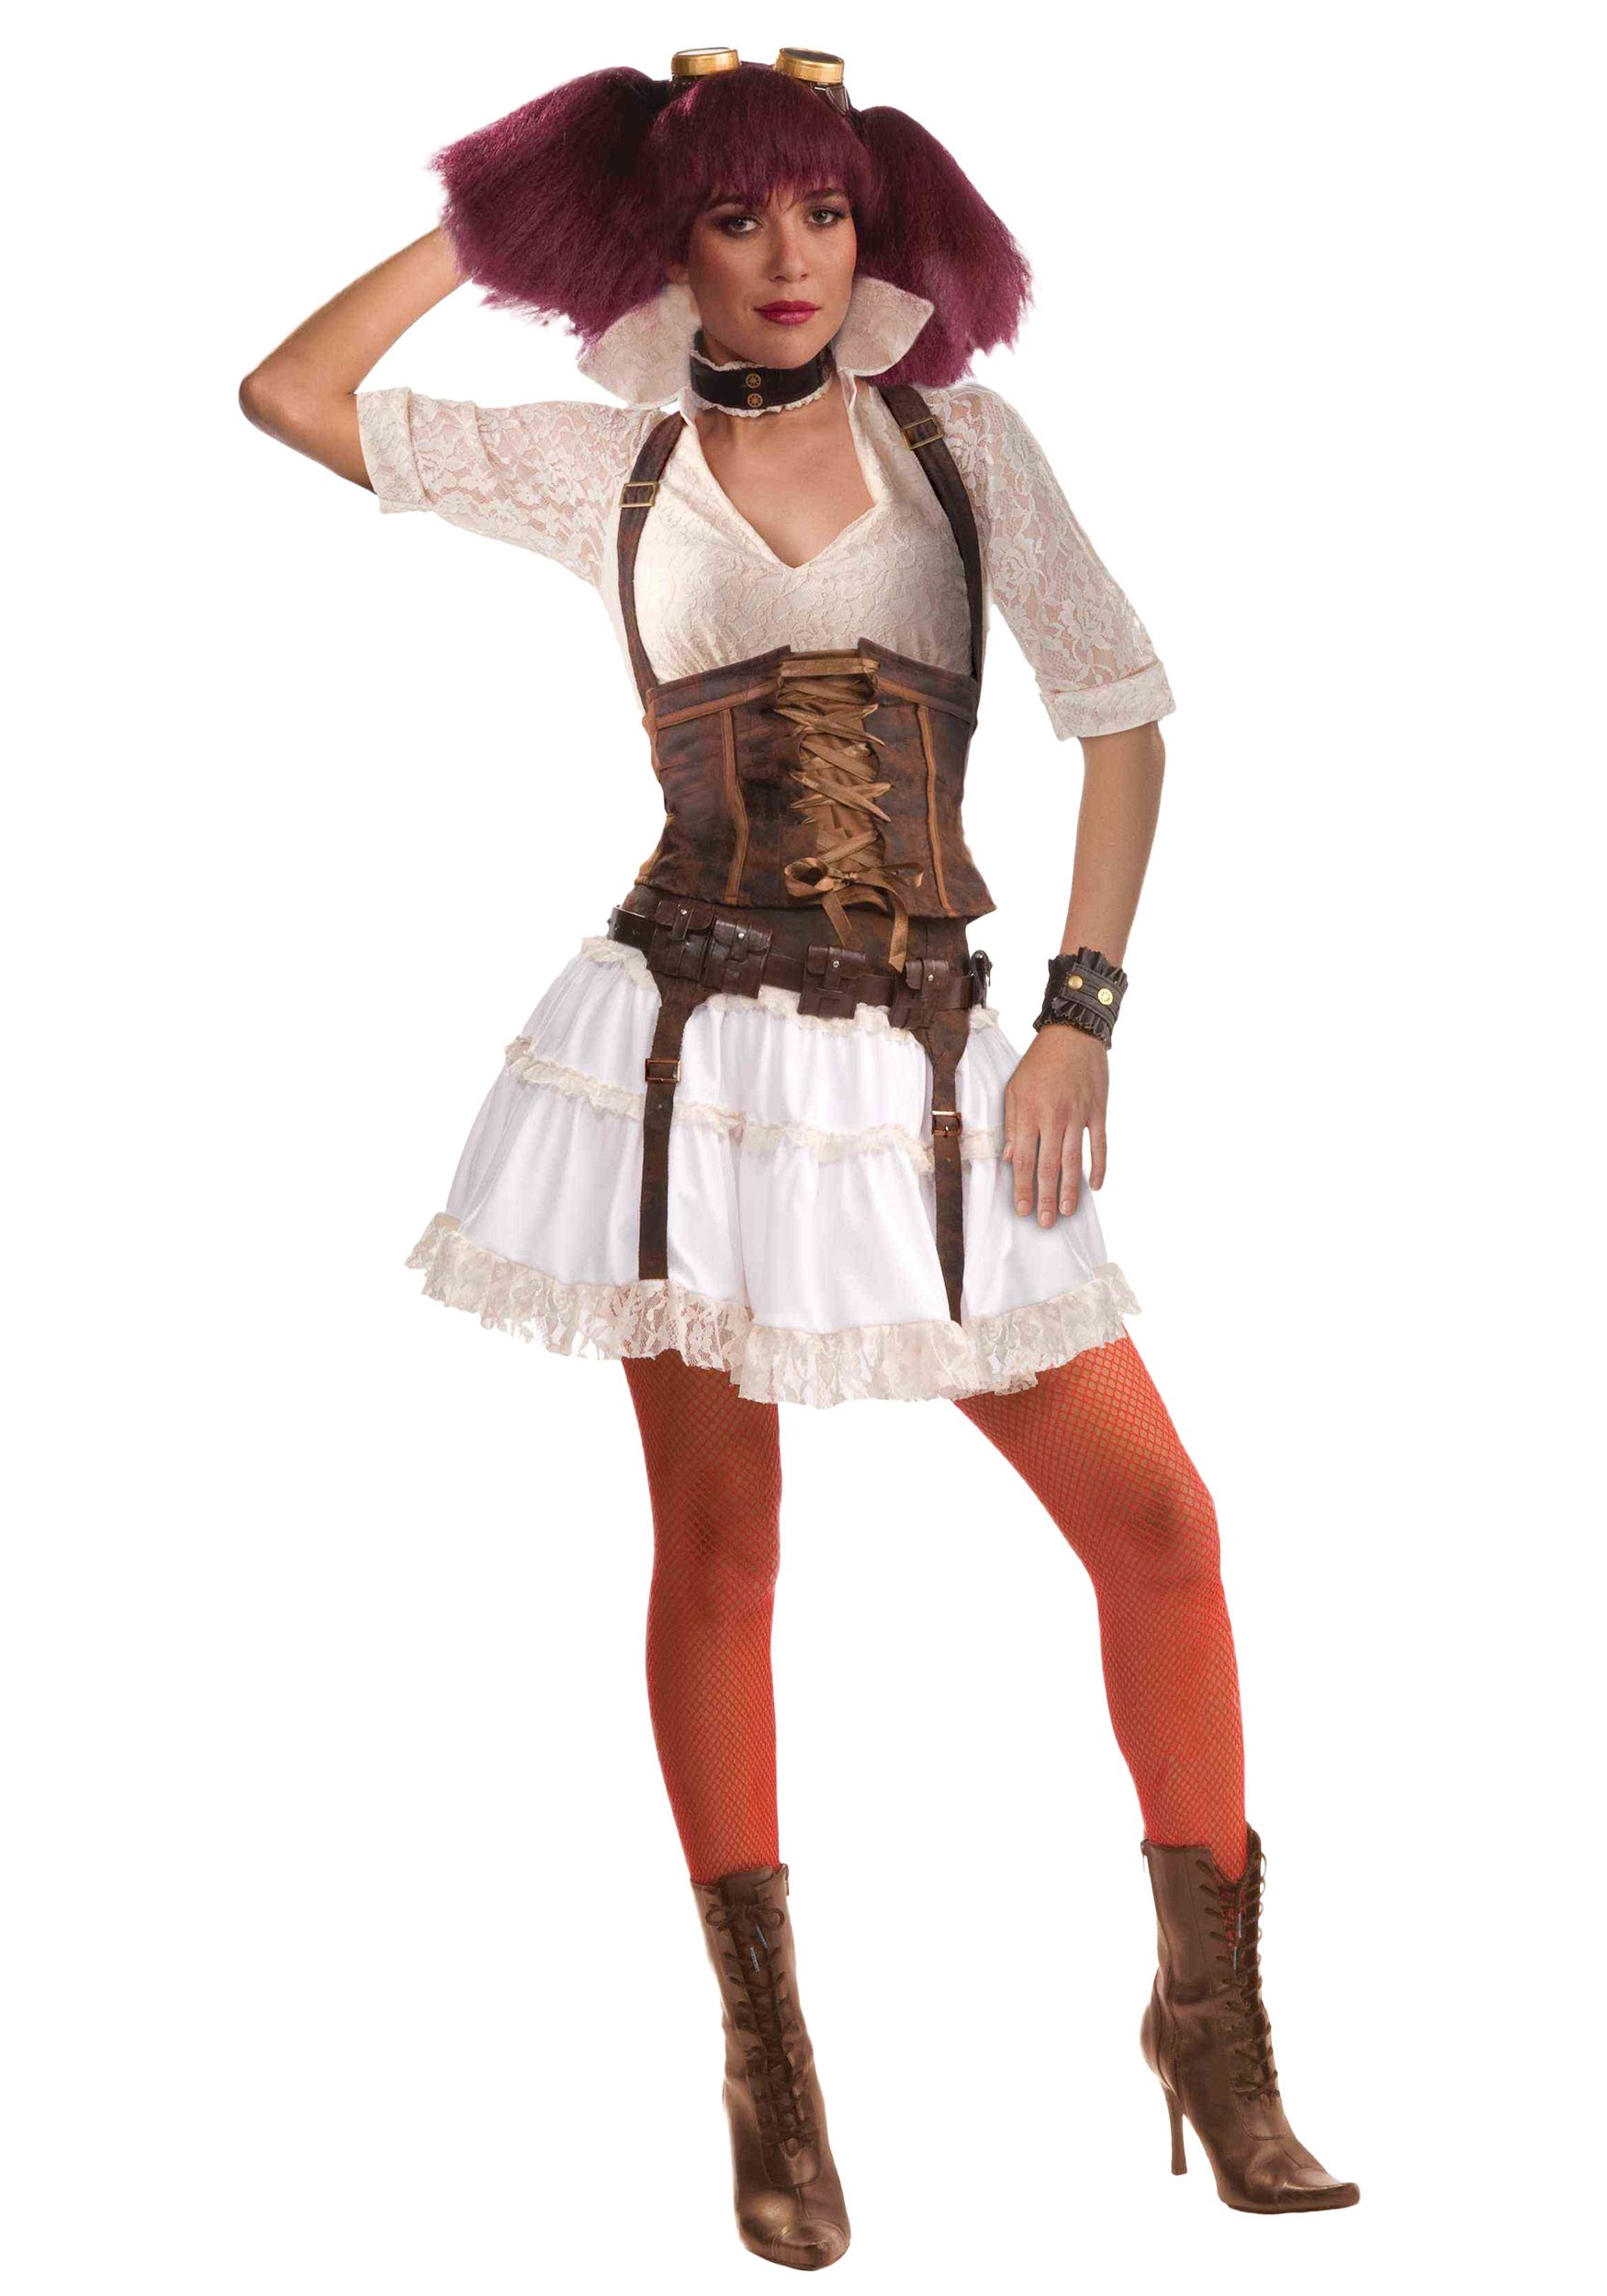 https://images.halloweencostumes.com/products/4054/1-1/womens-steampunk-costume-update-main.jpg